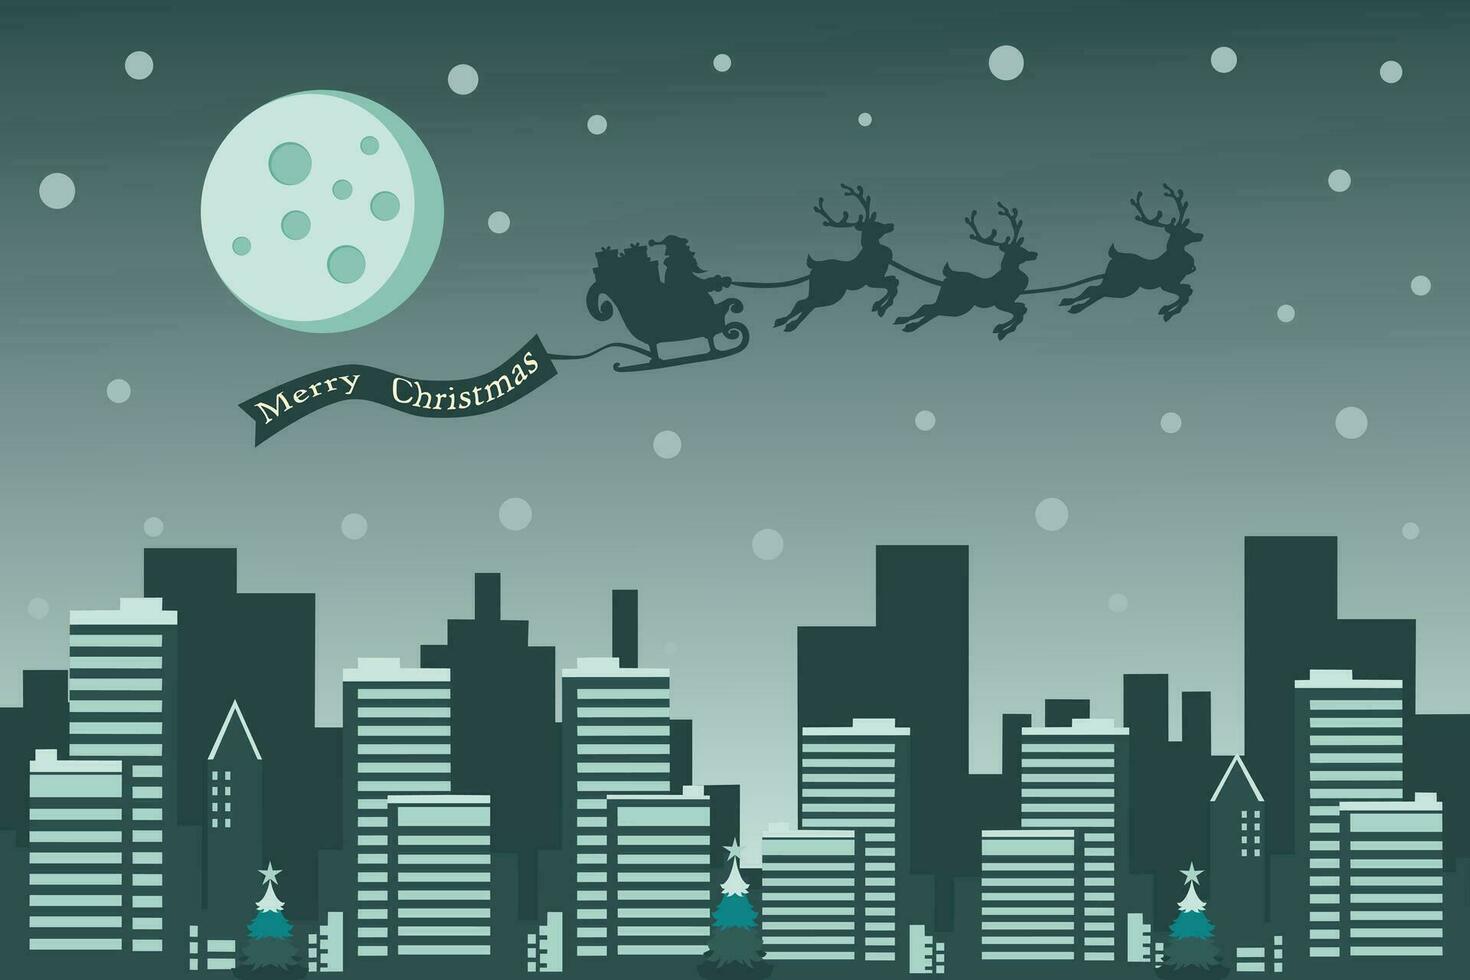 Merry Christmas background with Santa Claus flying on the sky in sleigh with reindeer at night with full moon, snow, and City. vector illustration.